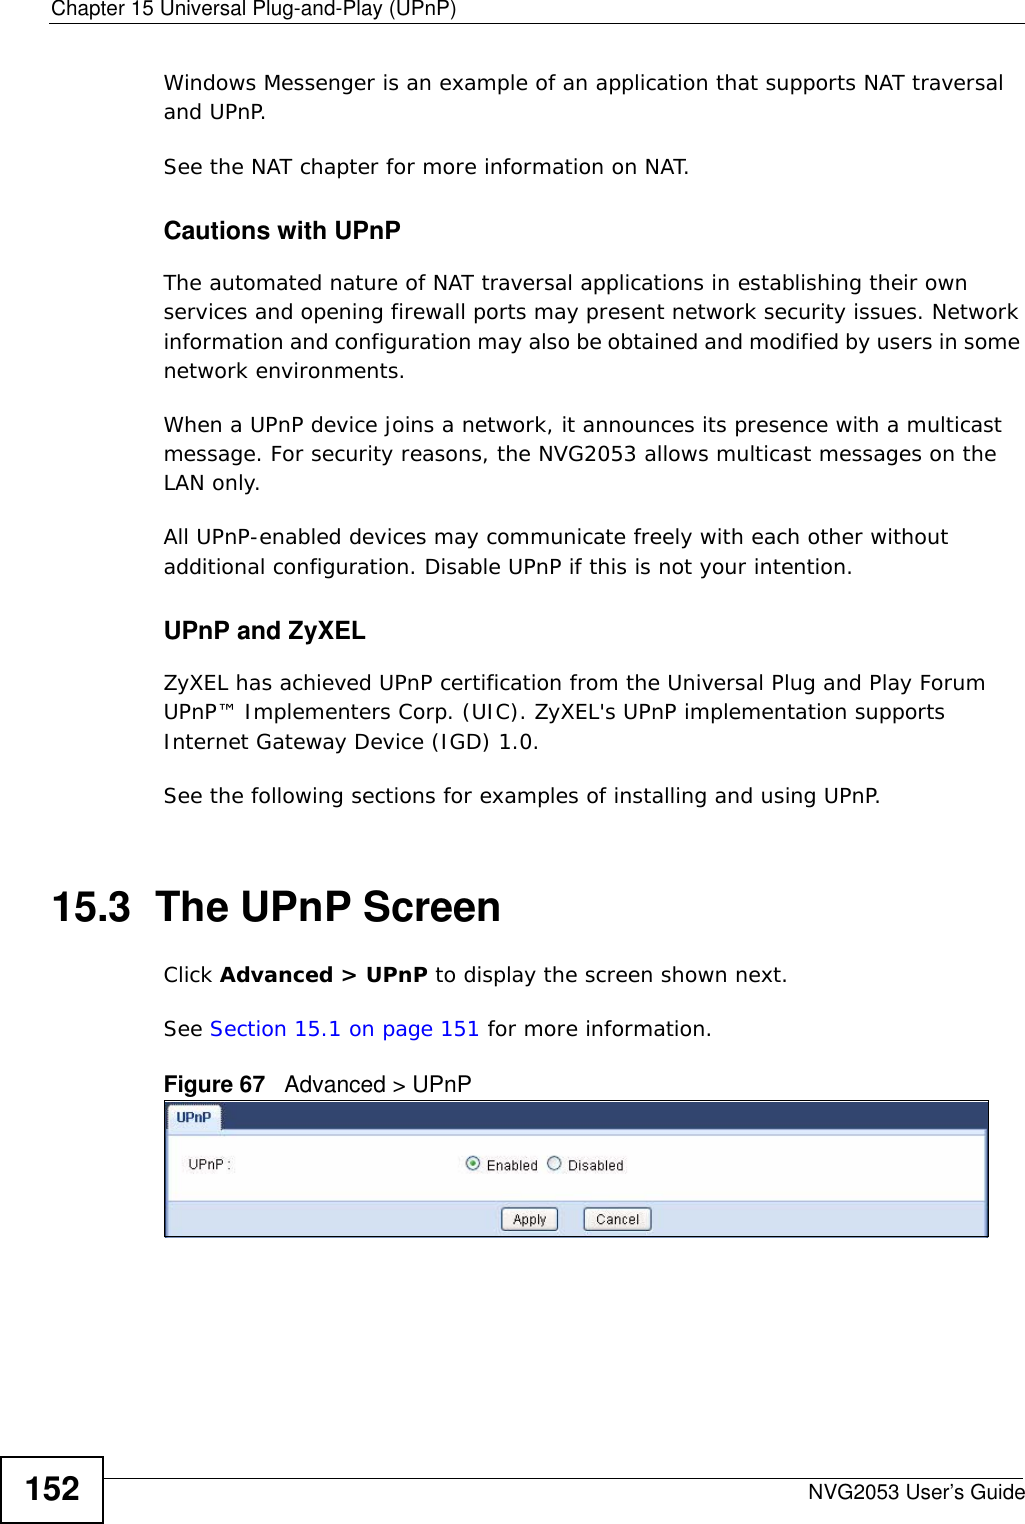 Chapter 15 Universal Plug-and-Play (UPnP)NVG2053 User’s Guide152Windows Messenger is an example of an application that supports NAT traversal and UPnP. See the NAT chapter for more information on NAT.Cautions with UPnPThe automated nature of NAT traversal applications in establishing their own services and opening firewall ports may present network security issues. Network information and configuration may also be obtained and modified by users in some network environments. When a UPnP device joins a network, it announces its presence with a multicast message. For security reasons, the NVG2053 allows multicast messages on the LAN only.All UPnP-enabled devices may communicate freely with each other without additional configuration. Disable UPnP if this is not your intention. UPnP and ZyXELZyXEL has achieved UPnP certification from the Universal Plug and Play Forum UPnP™ Implementers Corp. (UIC). ZyXEL&apos;s UPnP implementation supports Internet Gateway Device (IGD) 1.0. See the following sections for examples of installing and using UPnP.15.3  The UPnP ScreenClick Advanced &gt; UPnP to display the screen shown next.See Section 15.1 on page 151 for more information. Figure 67   Advanced &gt; UPnP 